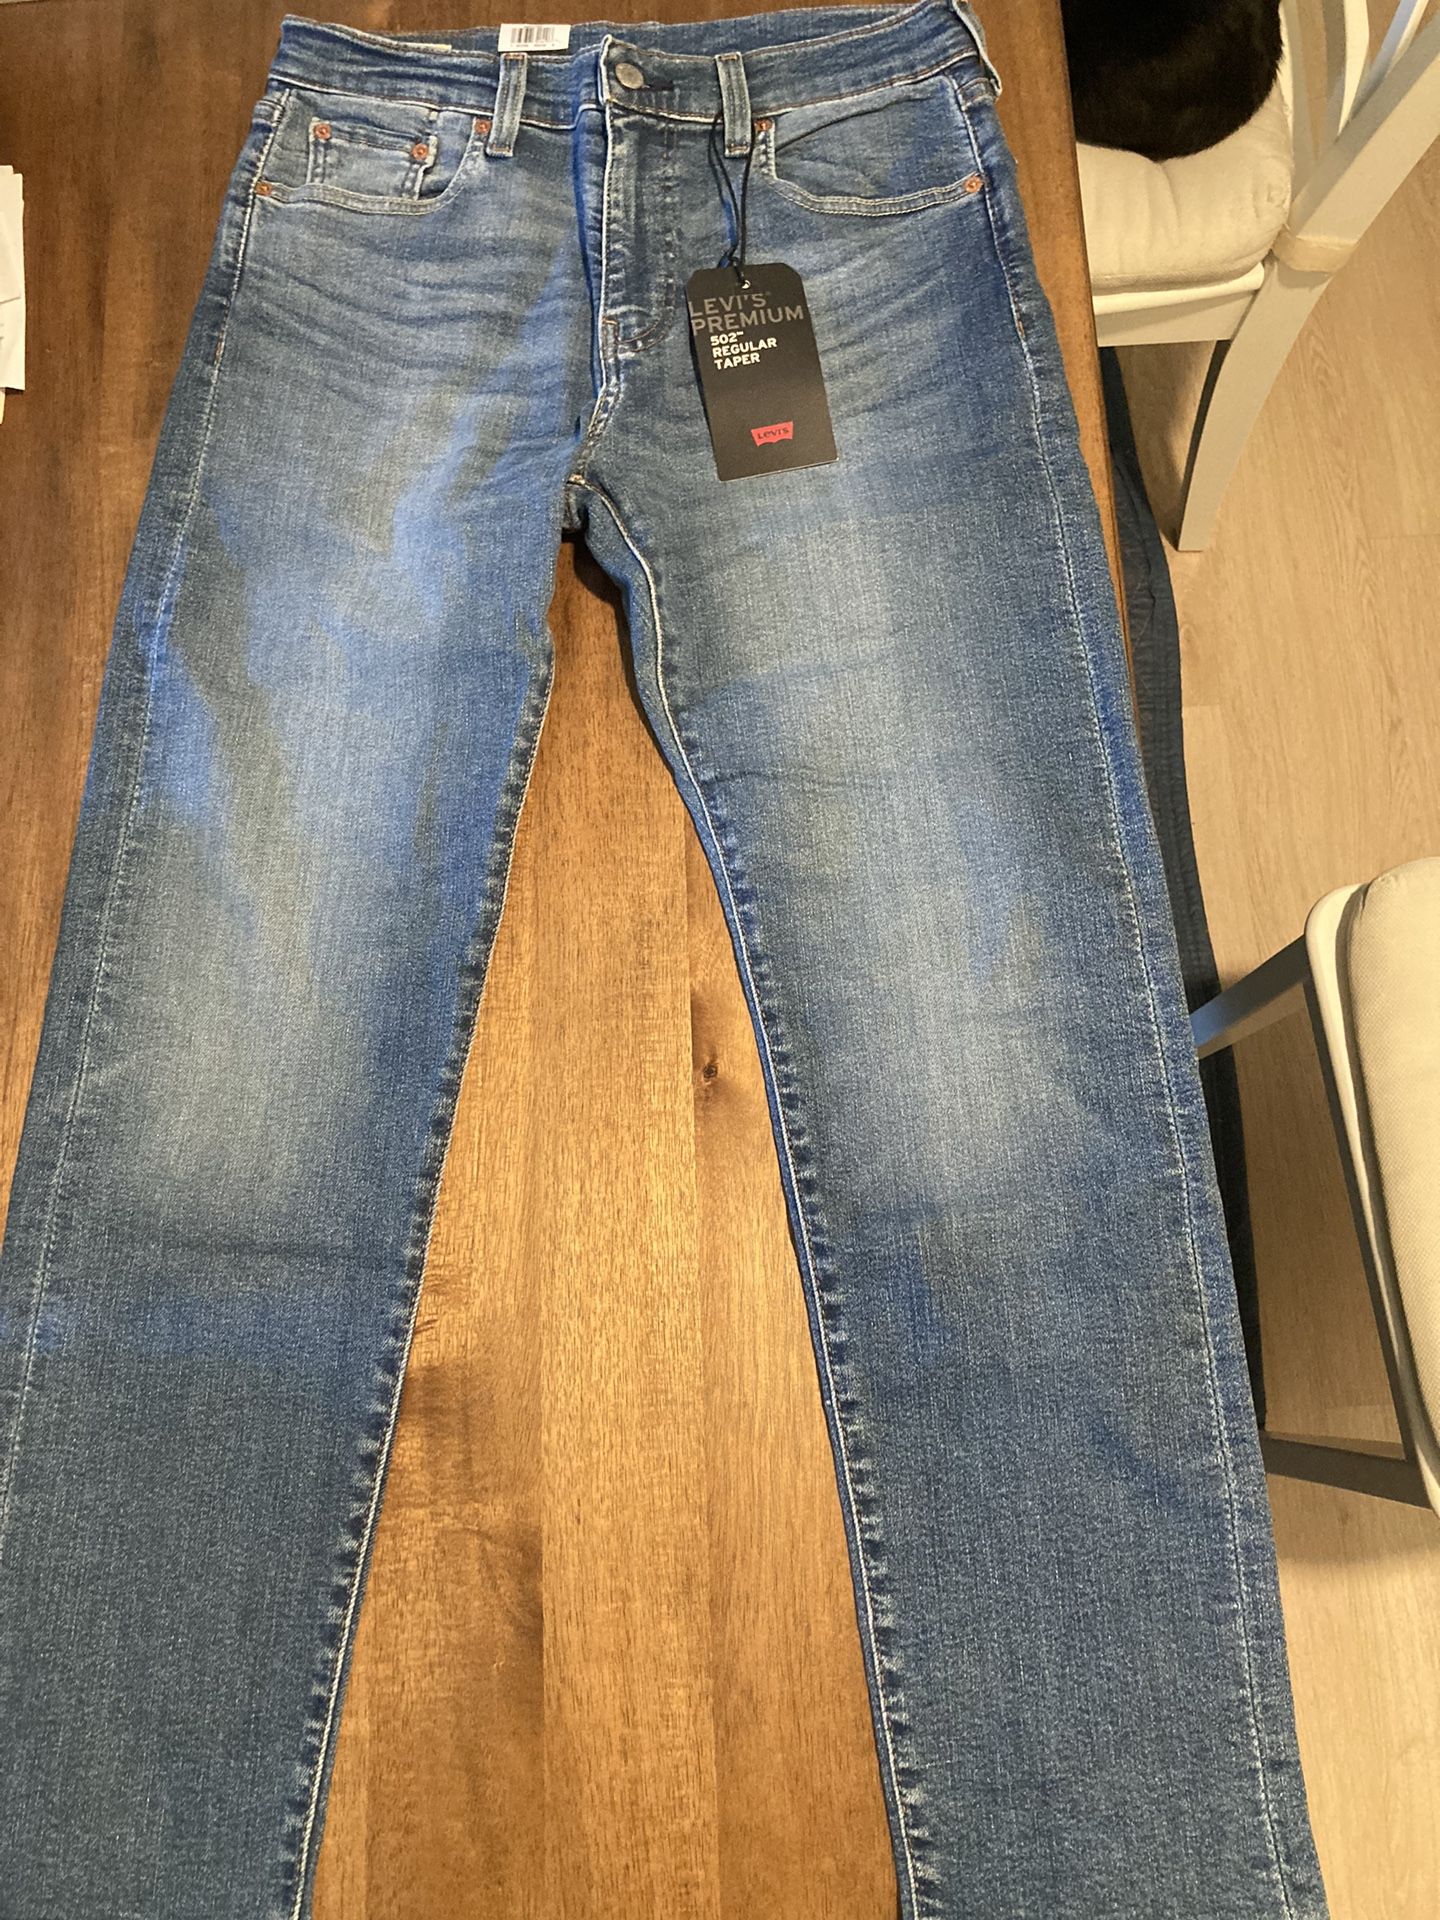 Levi’s 502 Regular Taper Jeans, 30 X 30, New With Tags